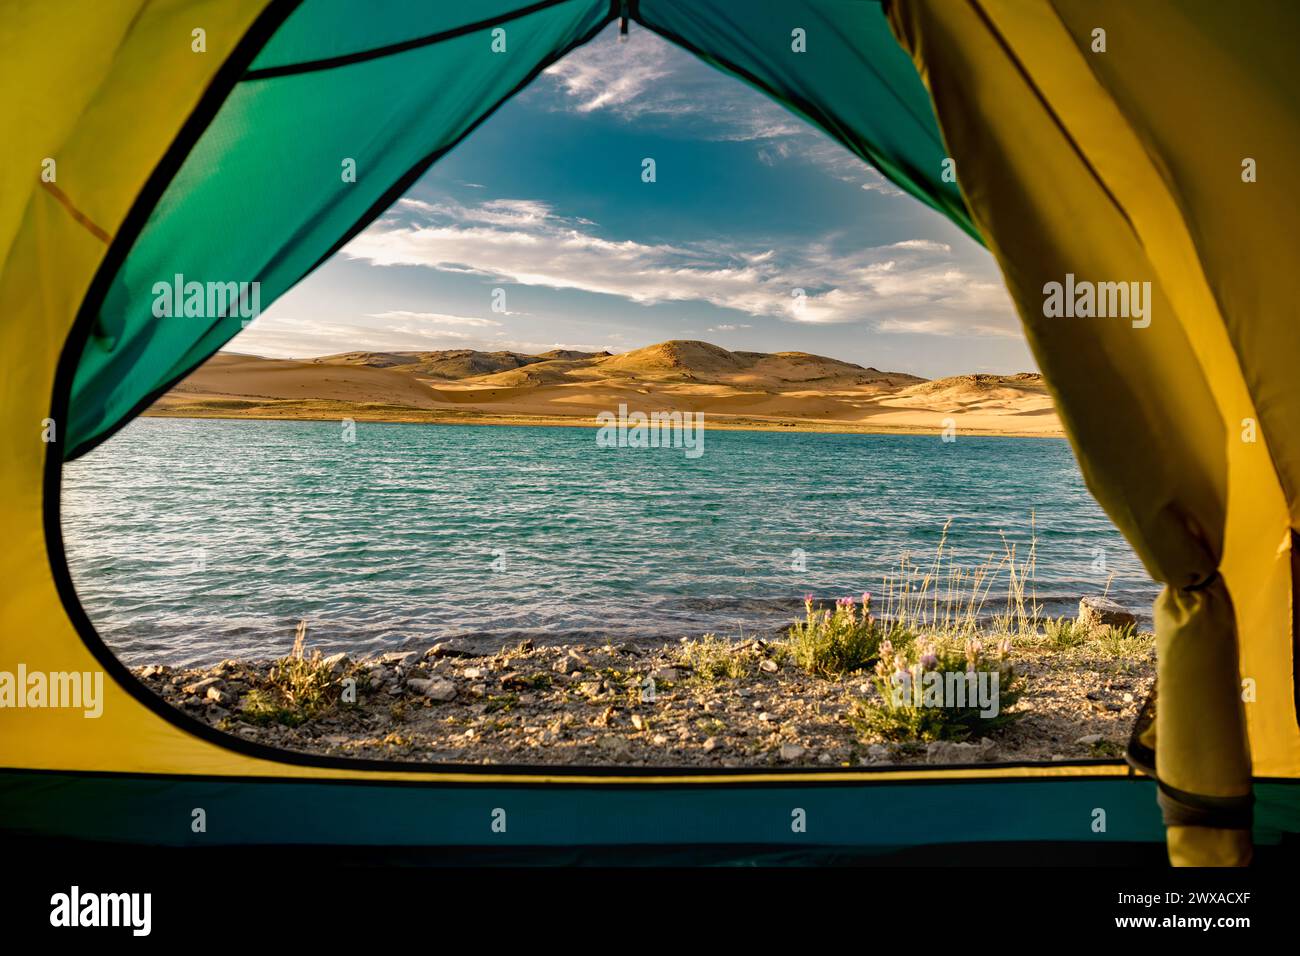 Nice view from tent at tranquil lake with turquoise water and sand dunes against blue sky Stock Photo